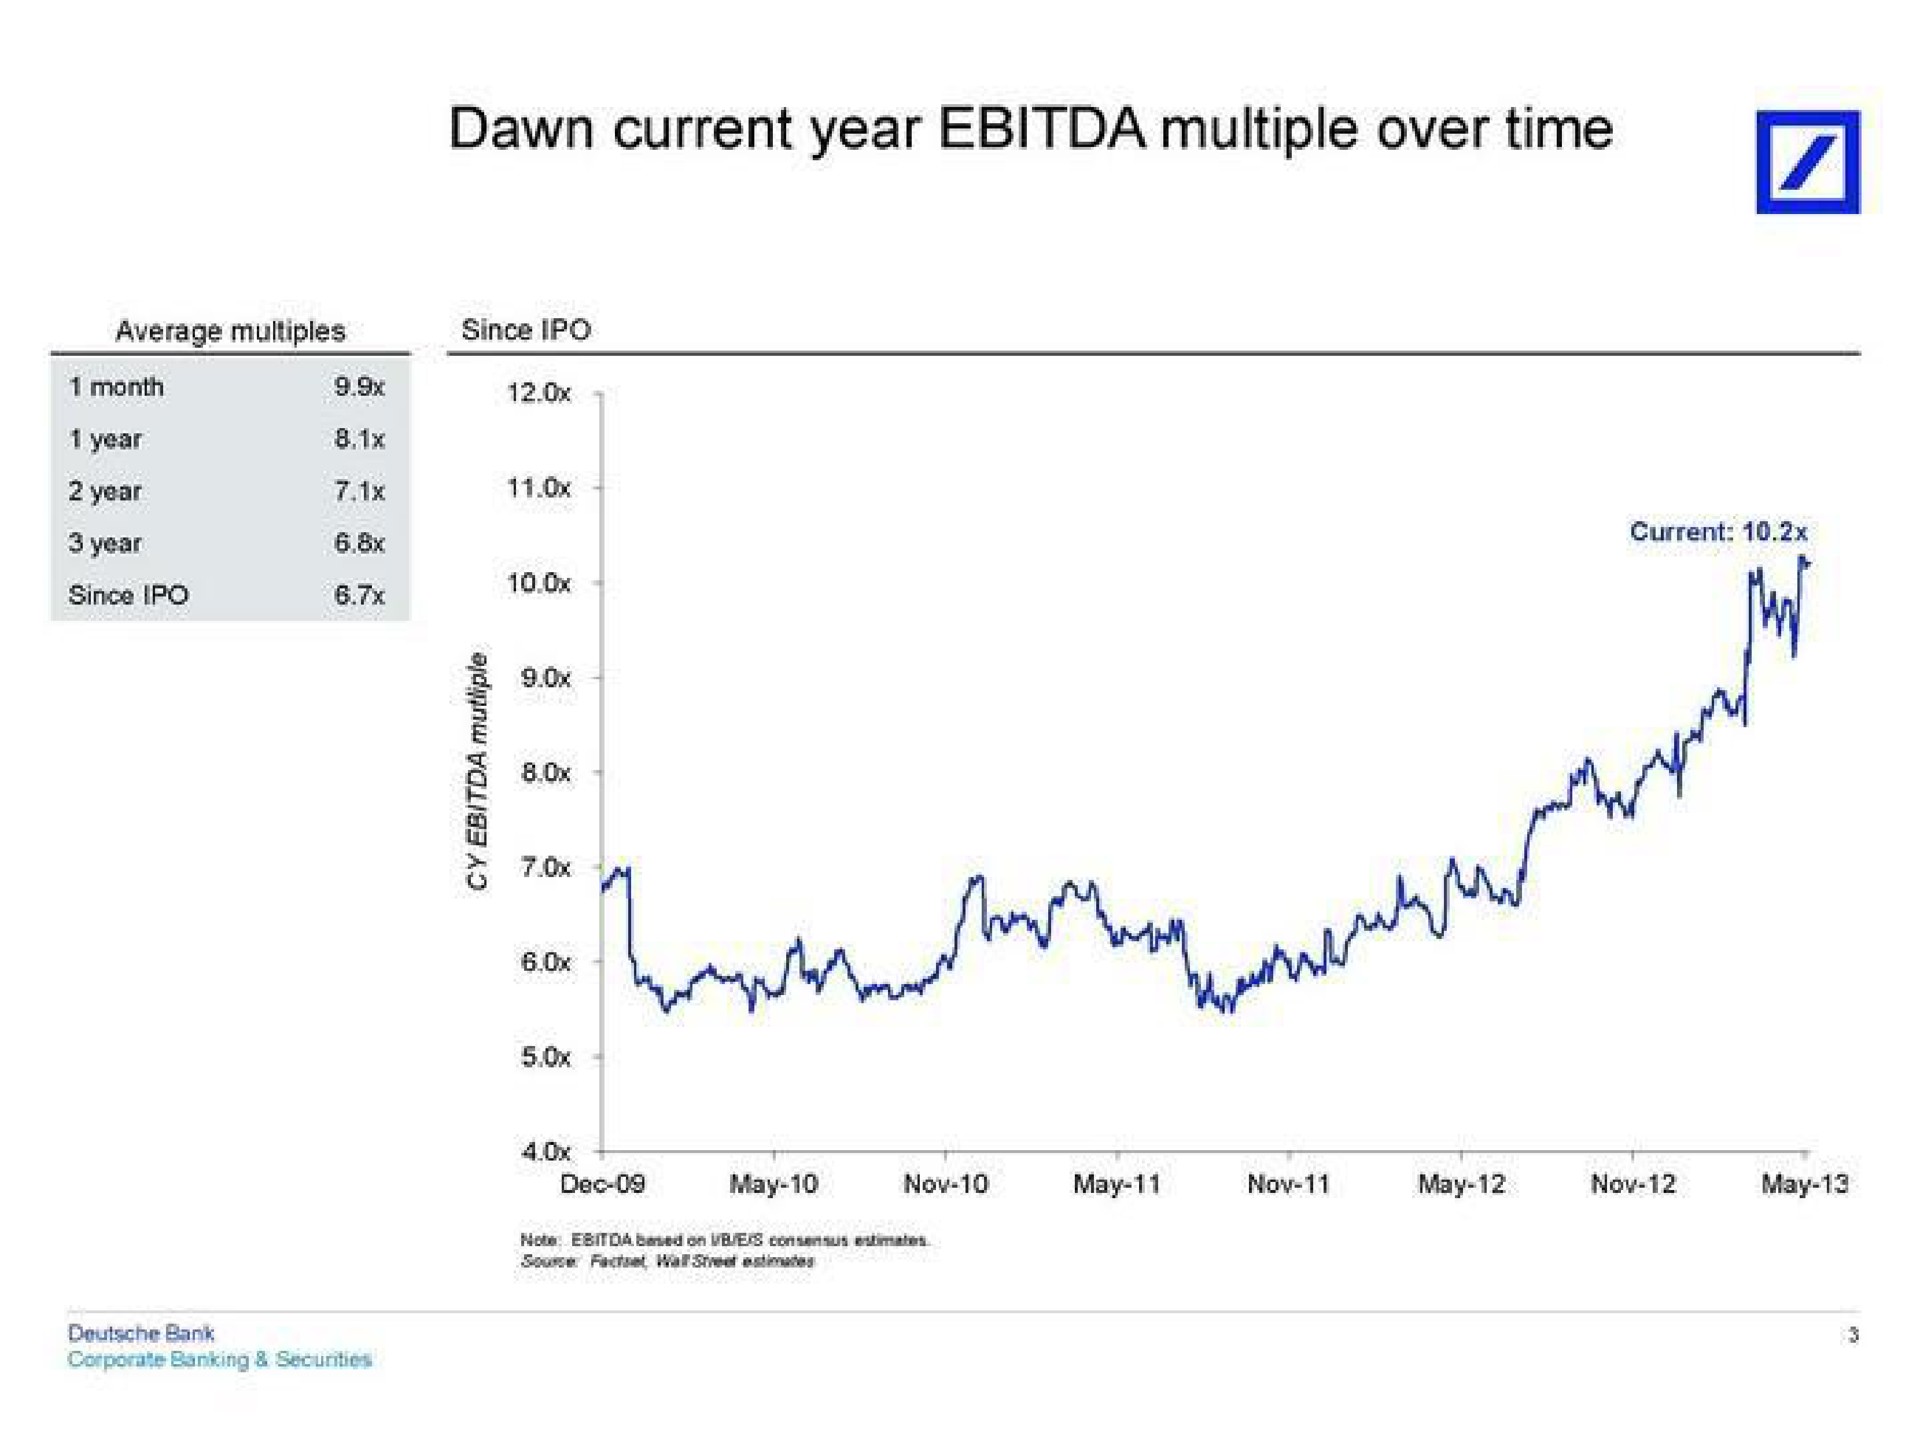 dawn current year multiple over time a | Deutsche Bank